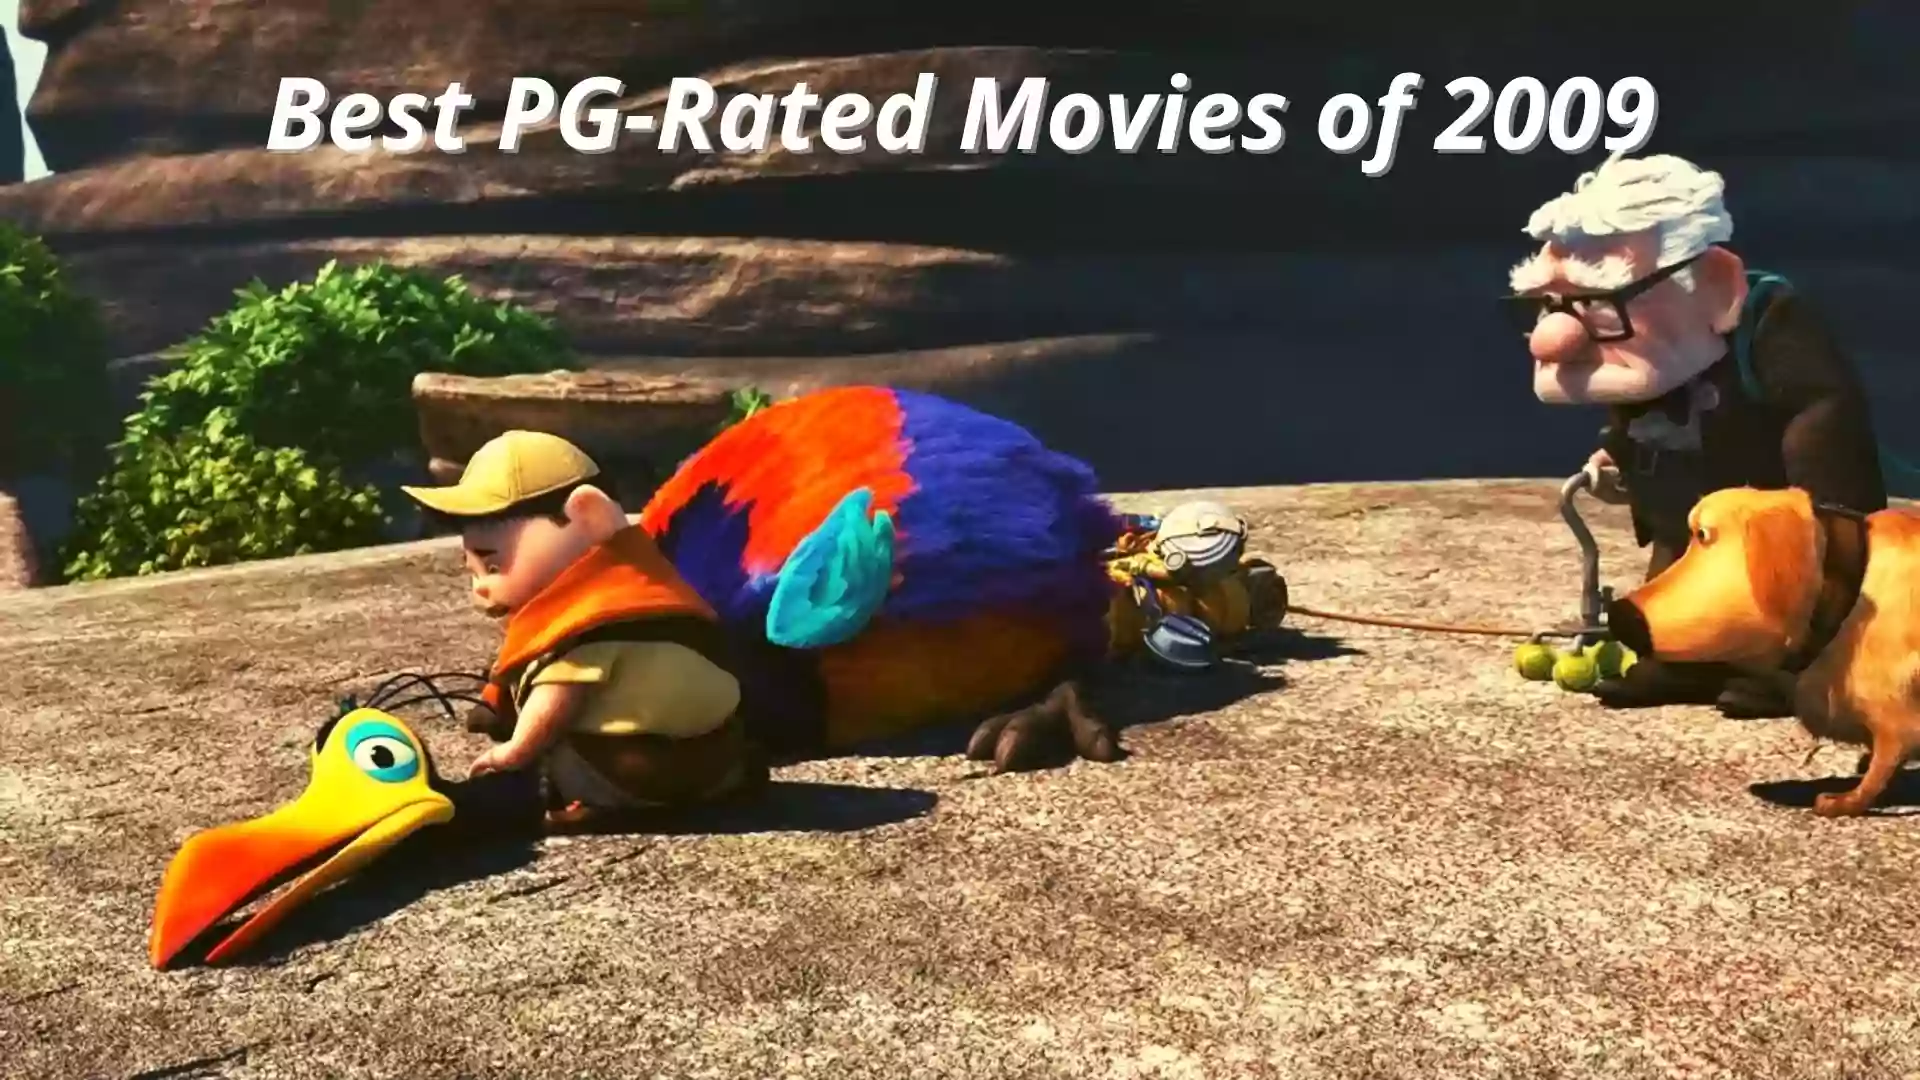 Best PG-Rated Movies of 2009